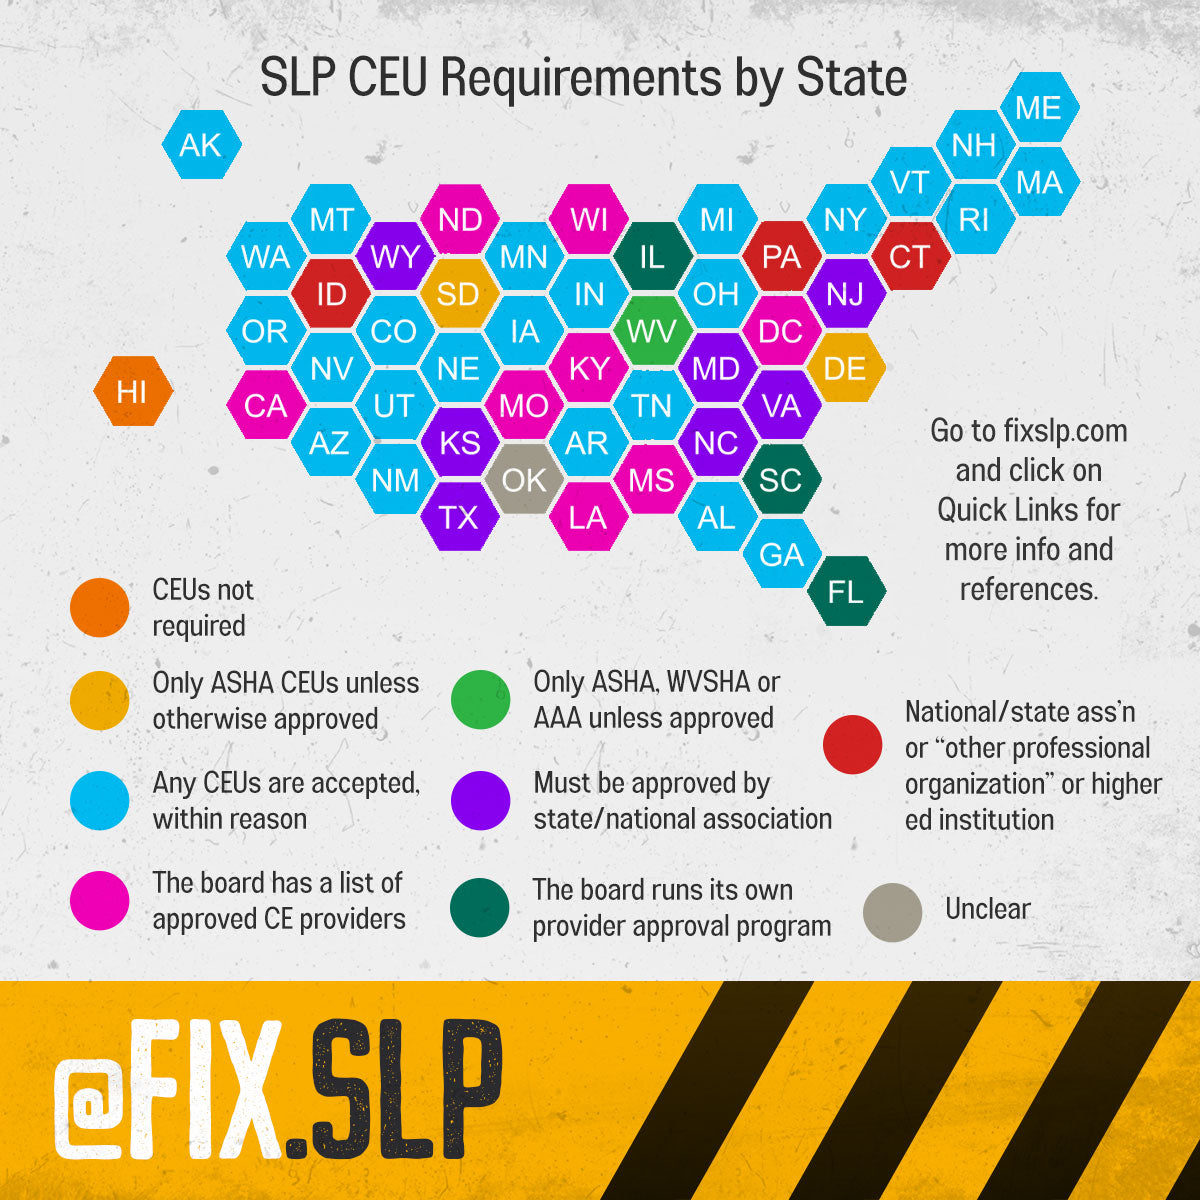 SLP CEU requirements by state in hexagonal map format.